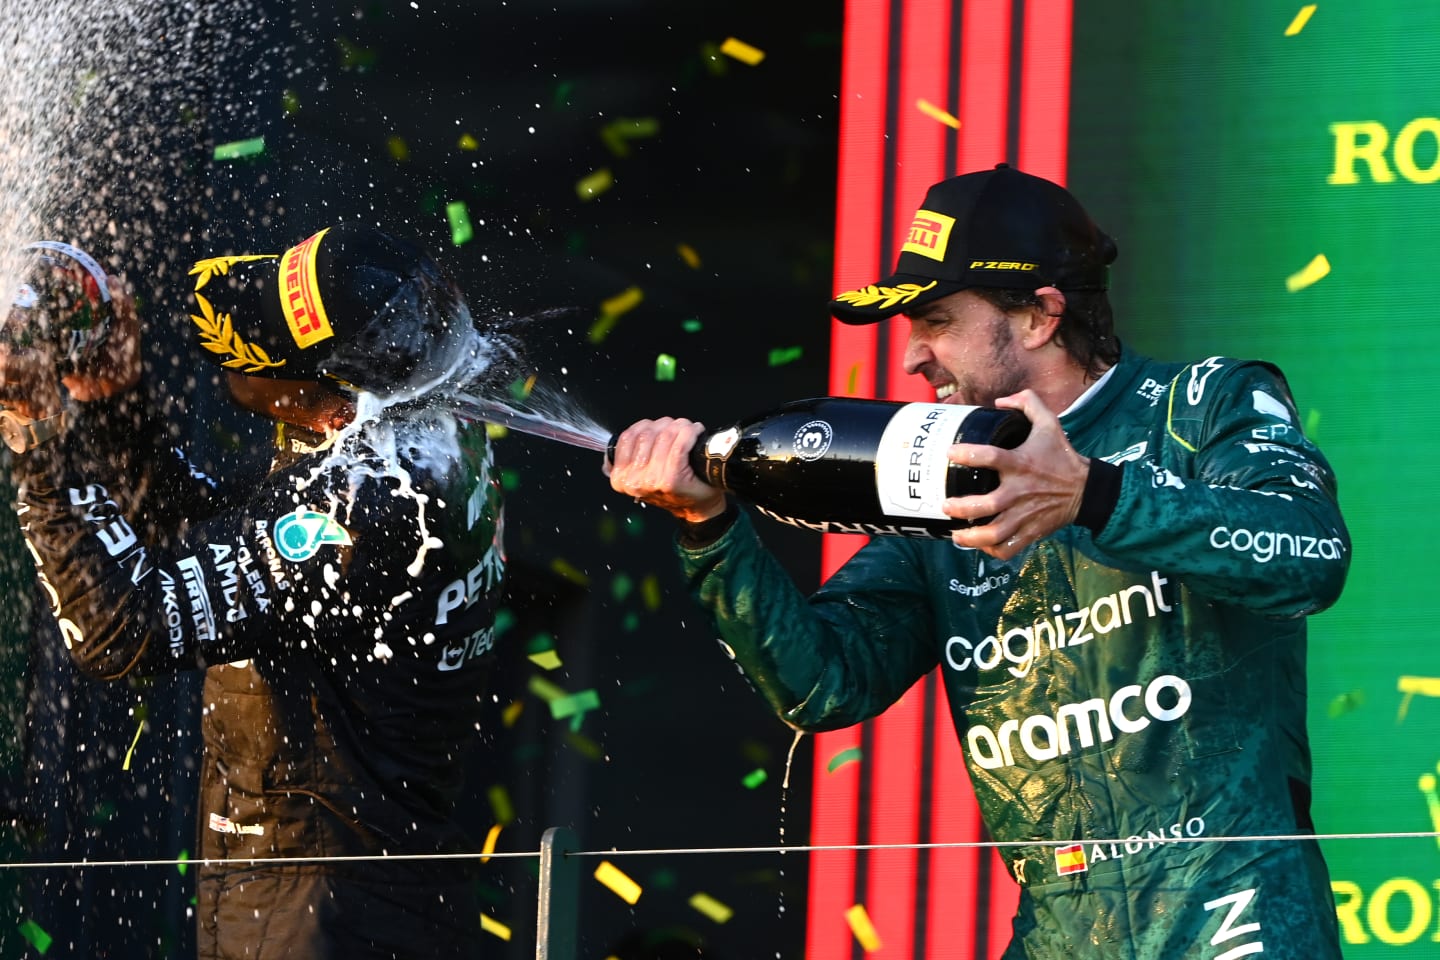 MELBOURNE, AUSTRALIA - APRIL 02: Third placed Fernando Alonso of Spain and Aston Martin F1 Team celebrates on the podium during the F1 Grand Prix of Australia at Albert Park Grand Prix Circuit on April 02, 2023 in Melbourne, Australia. (Photo by Quinn Rooney/Getty Images)